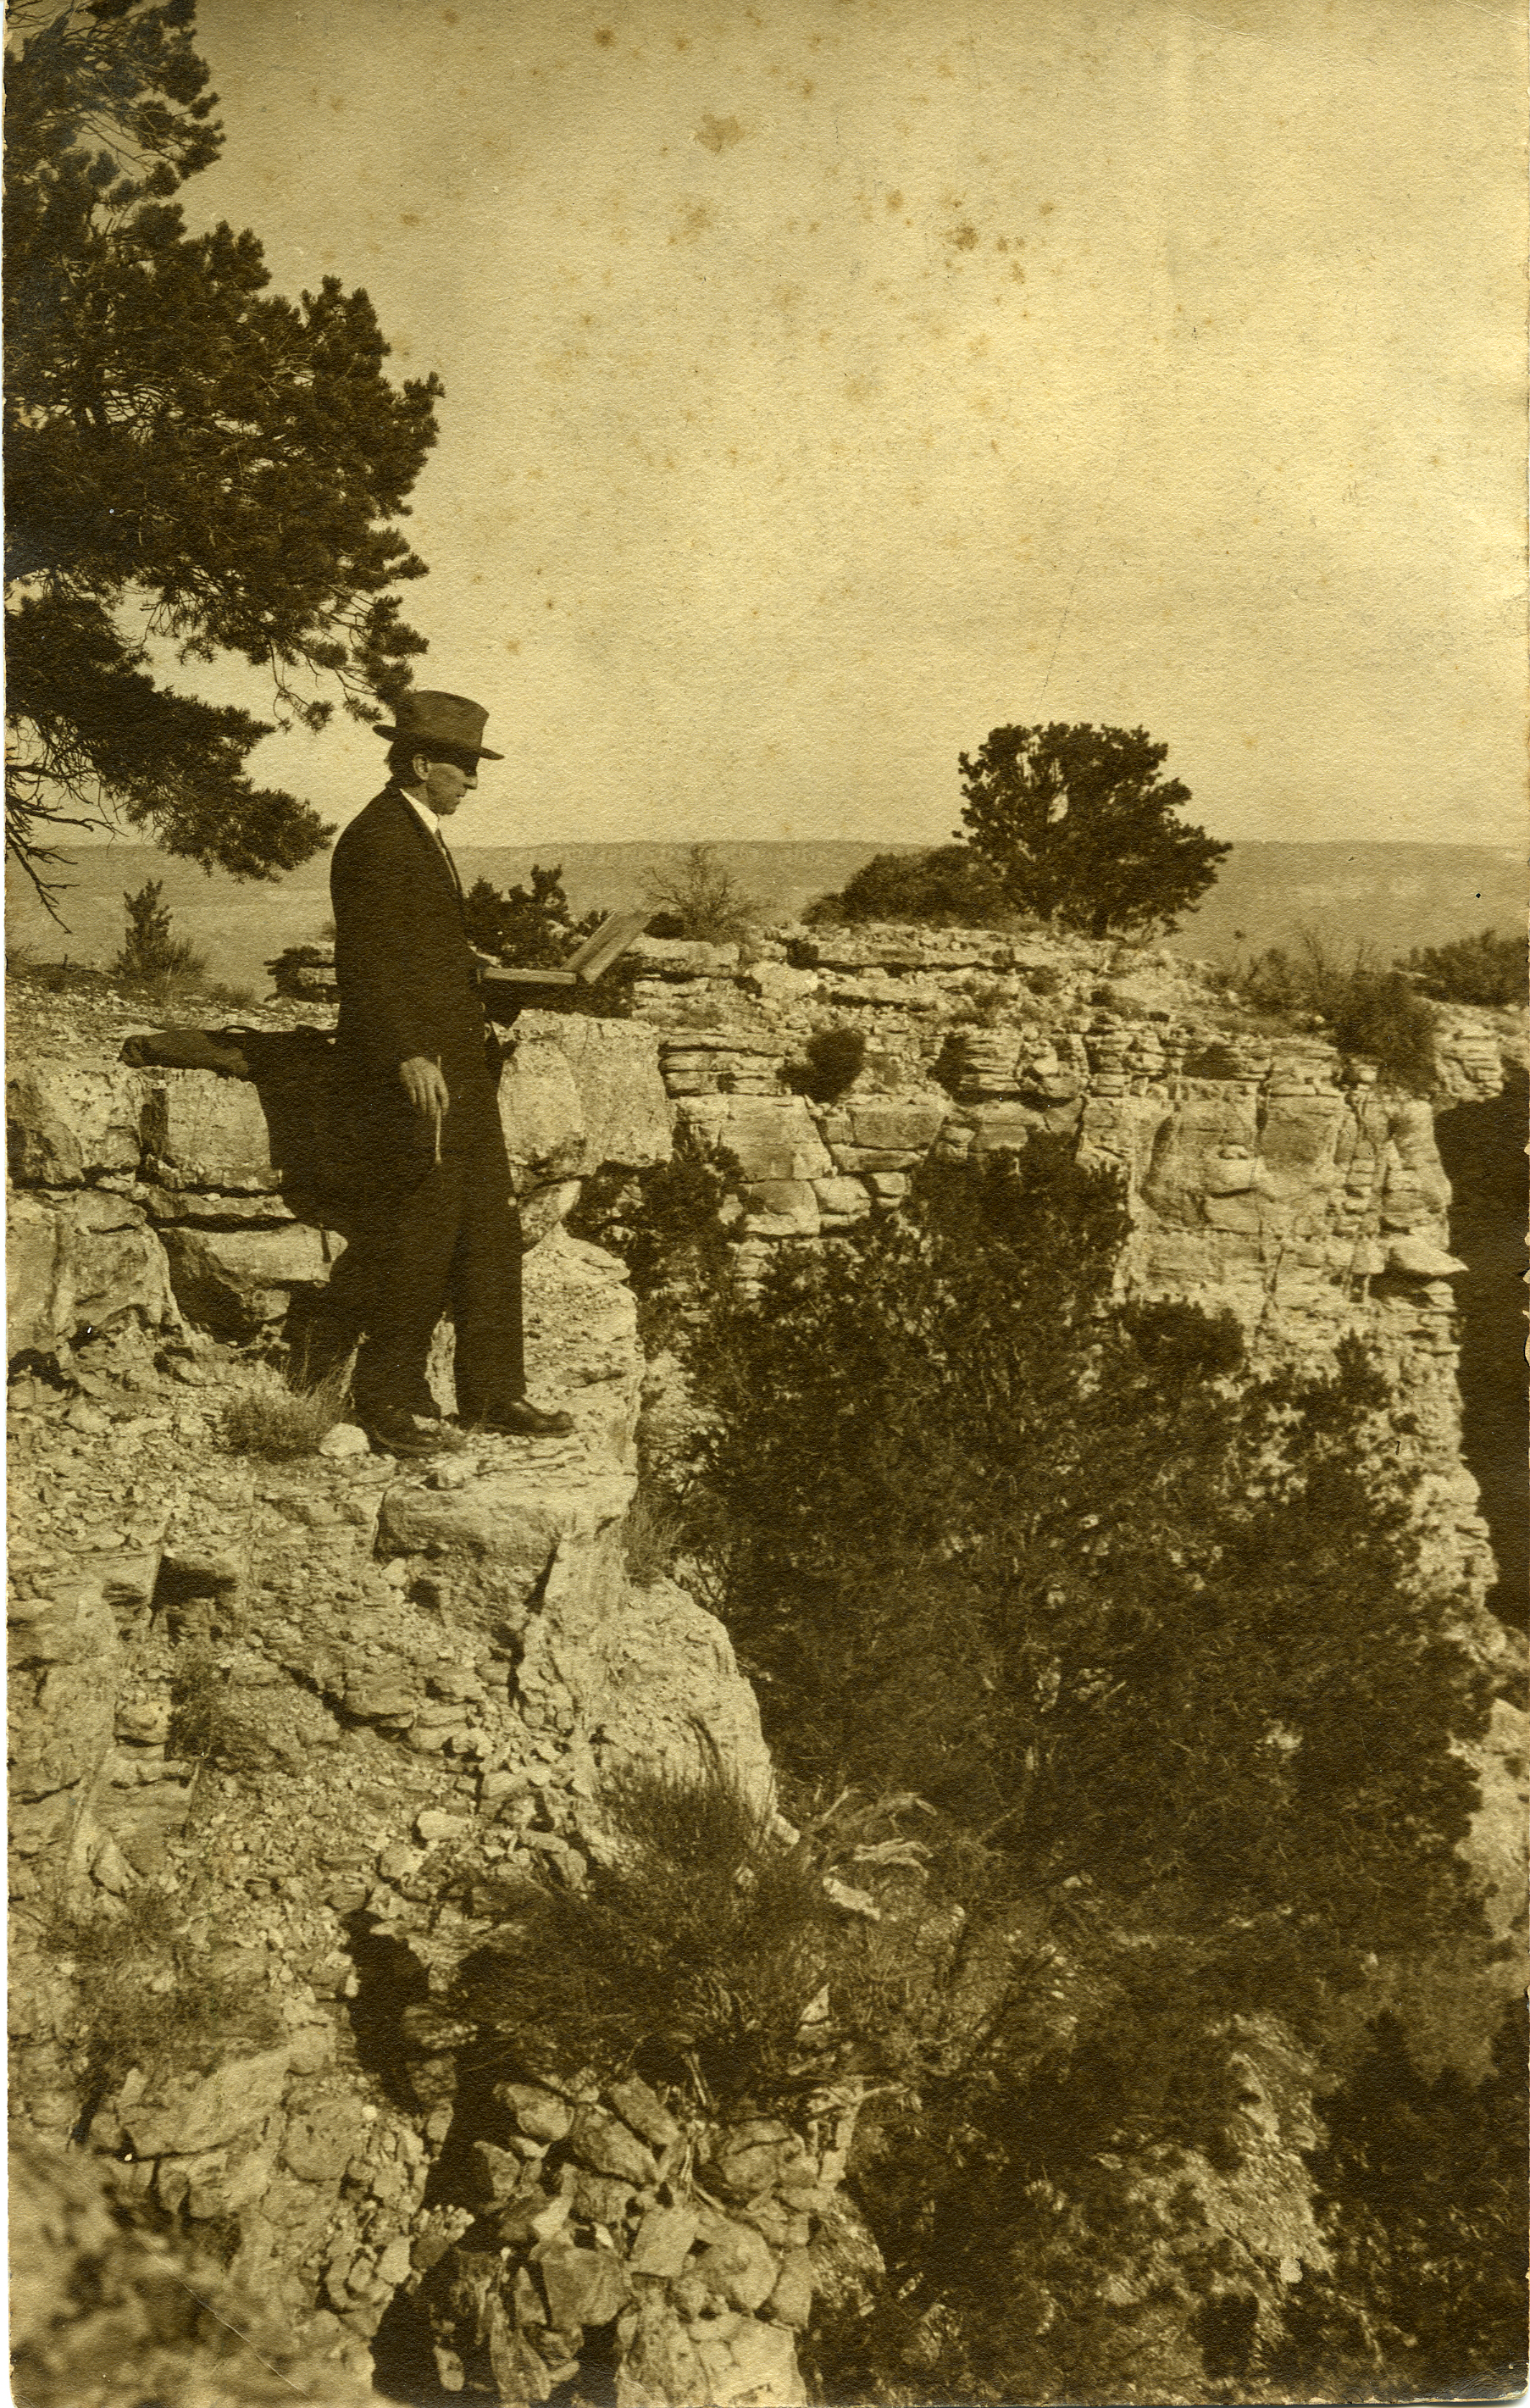   Elliott Daingerfield working at the rim of the Grand Canyon.  